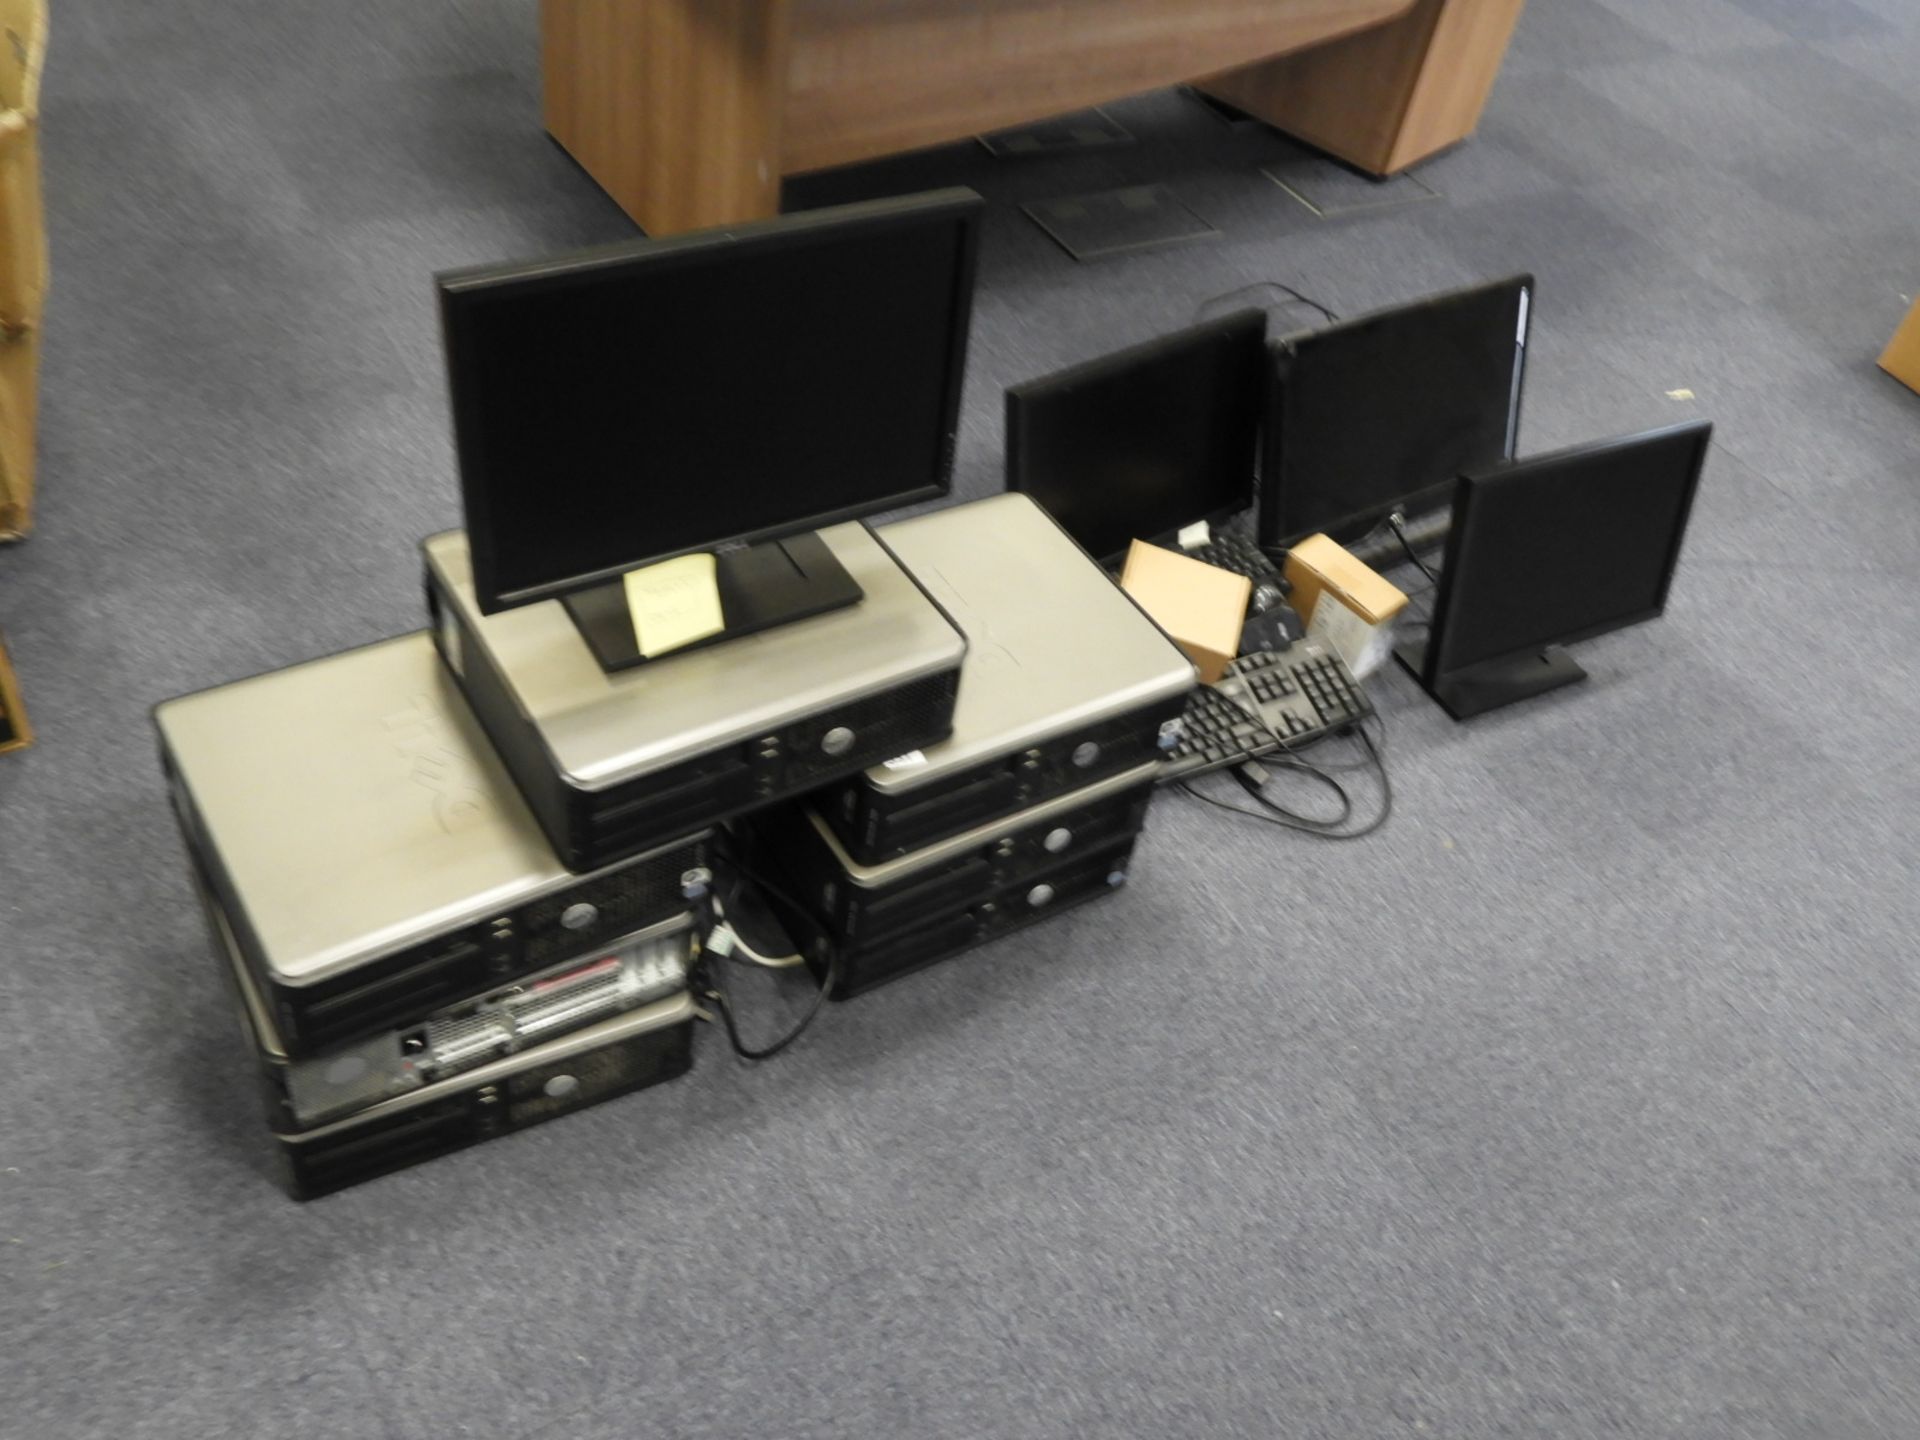 Six Dell Desktop PC, Keyboards, Monitors and Mice etc.